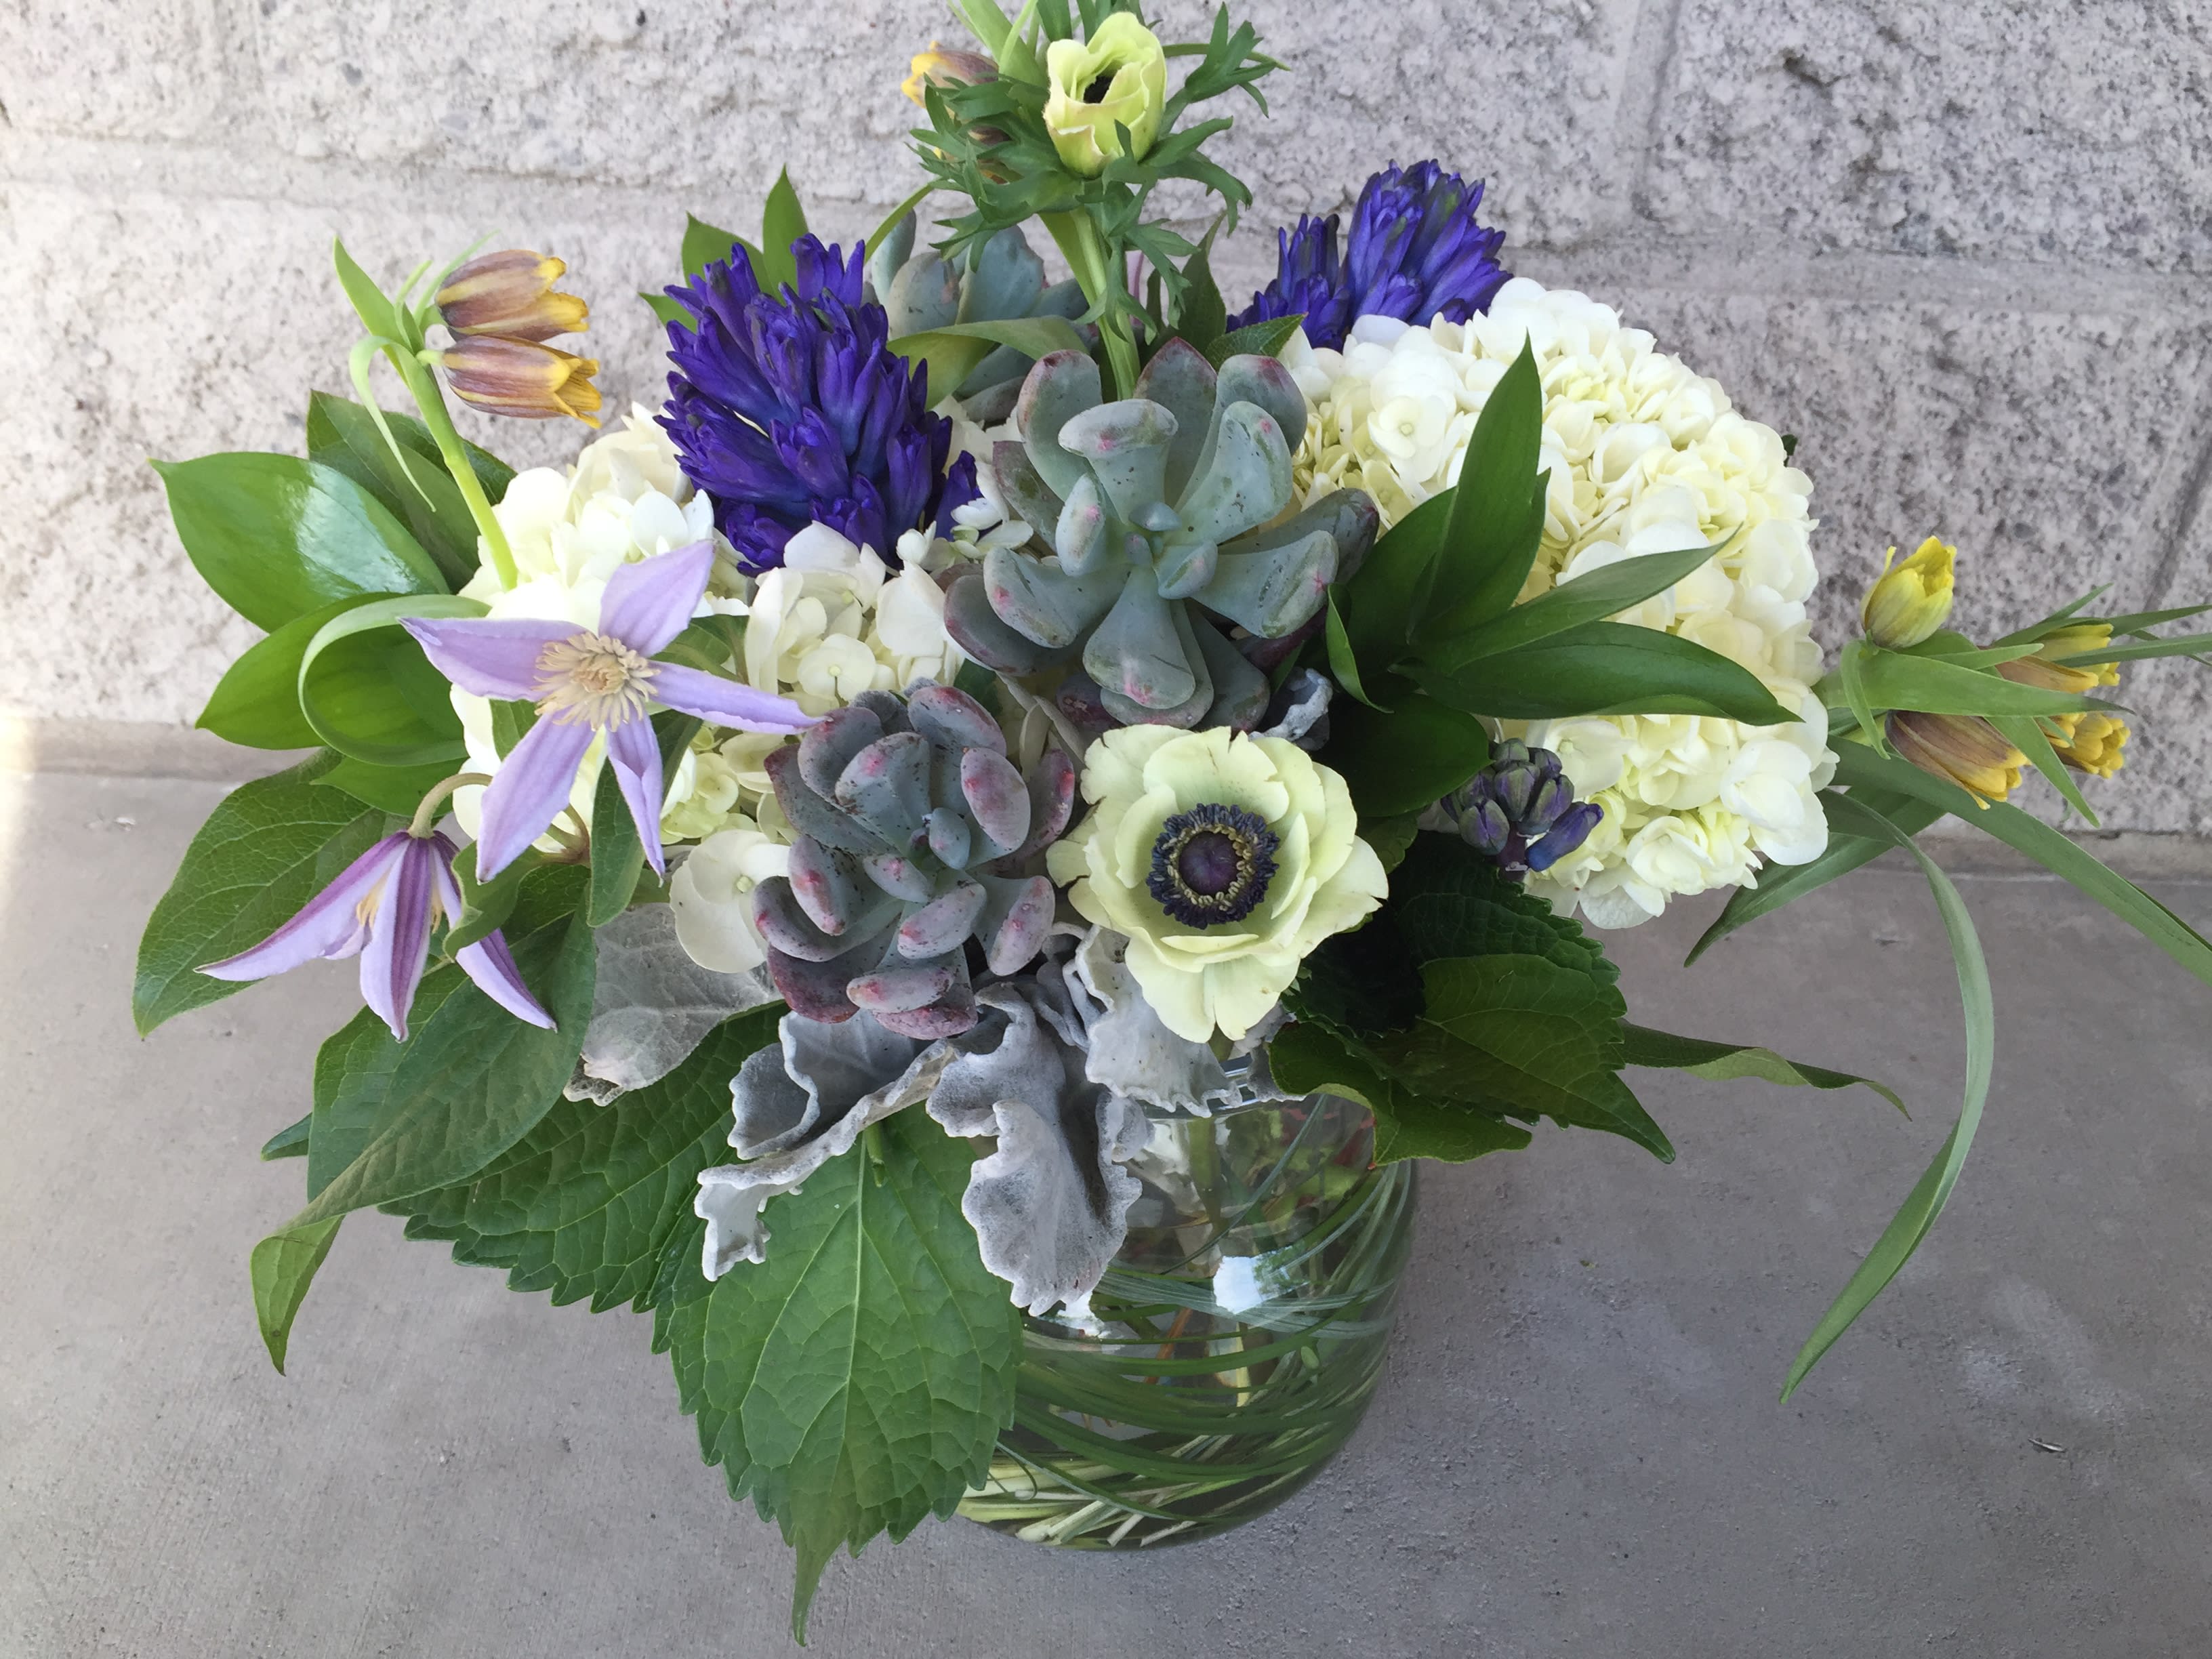 something with blue - anemonies and hydrangea hanging out